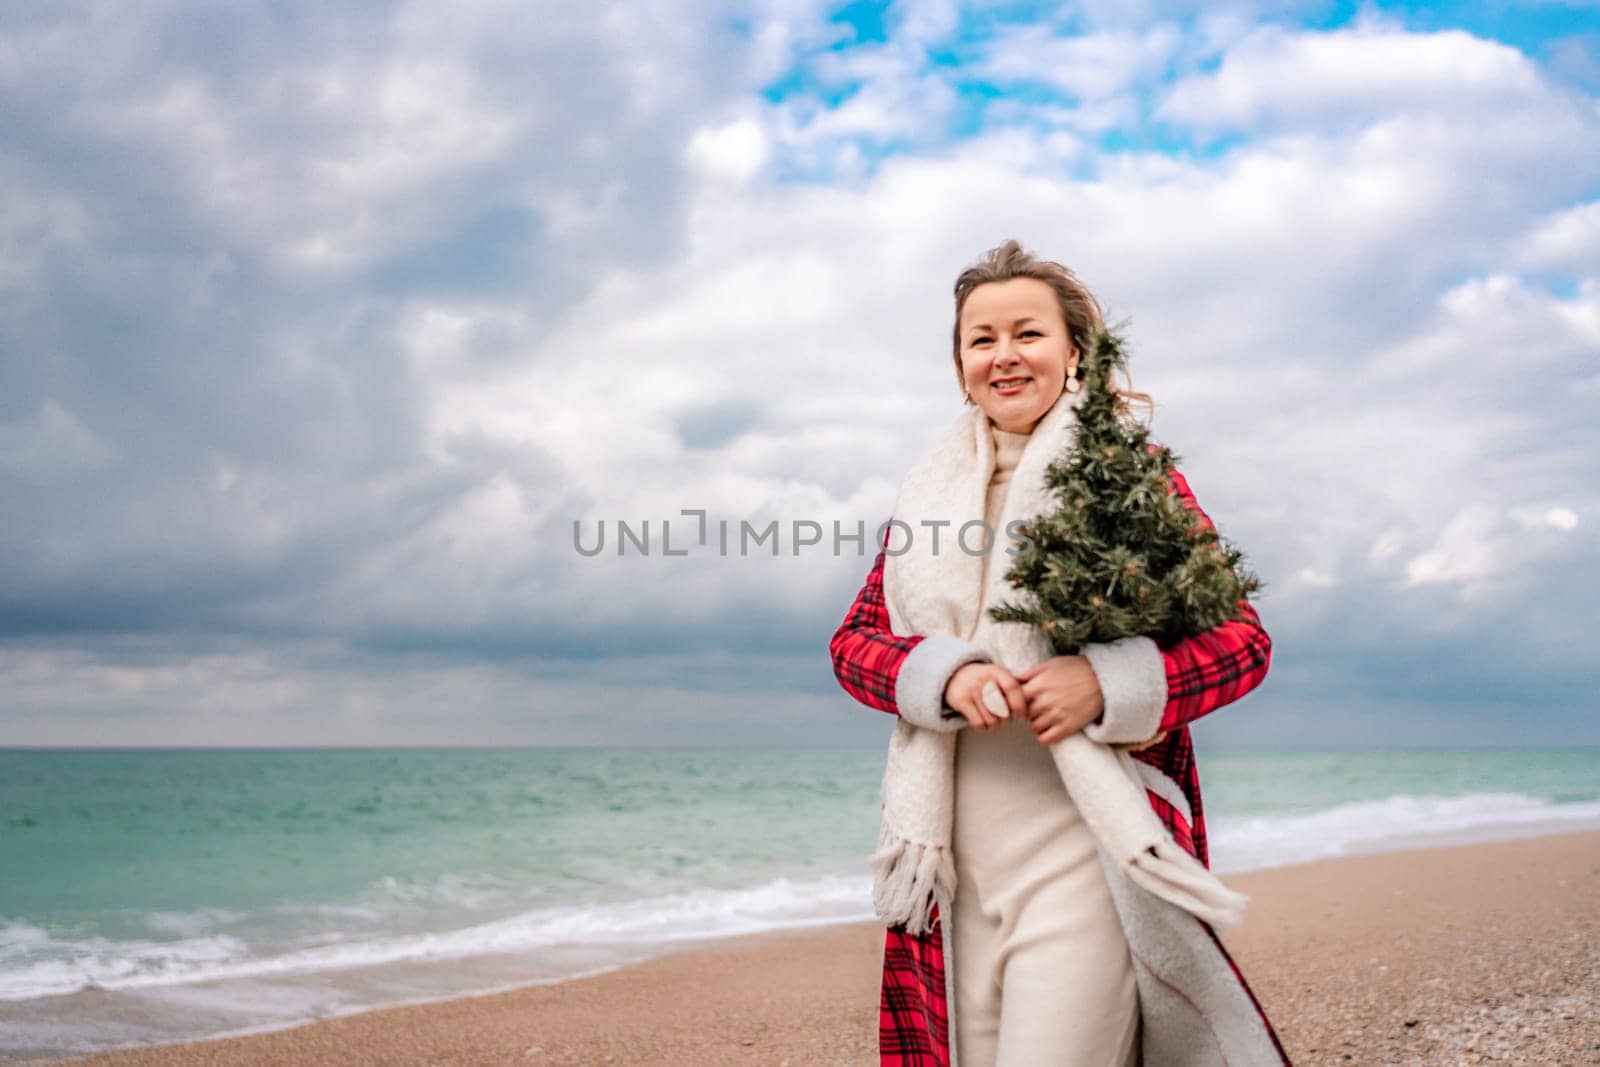 Blond woman holding Christmas tree by the sea. Christmas portrait of a happy woman walking along the beach and holding a Christmas tree in her hands. Dressed in a red coat, white dress. by Matiunina